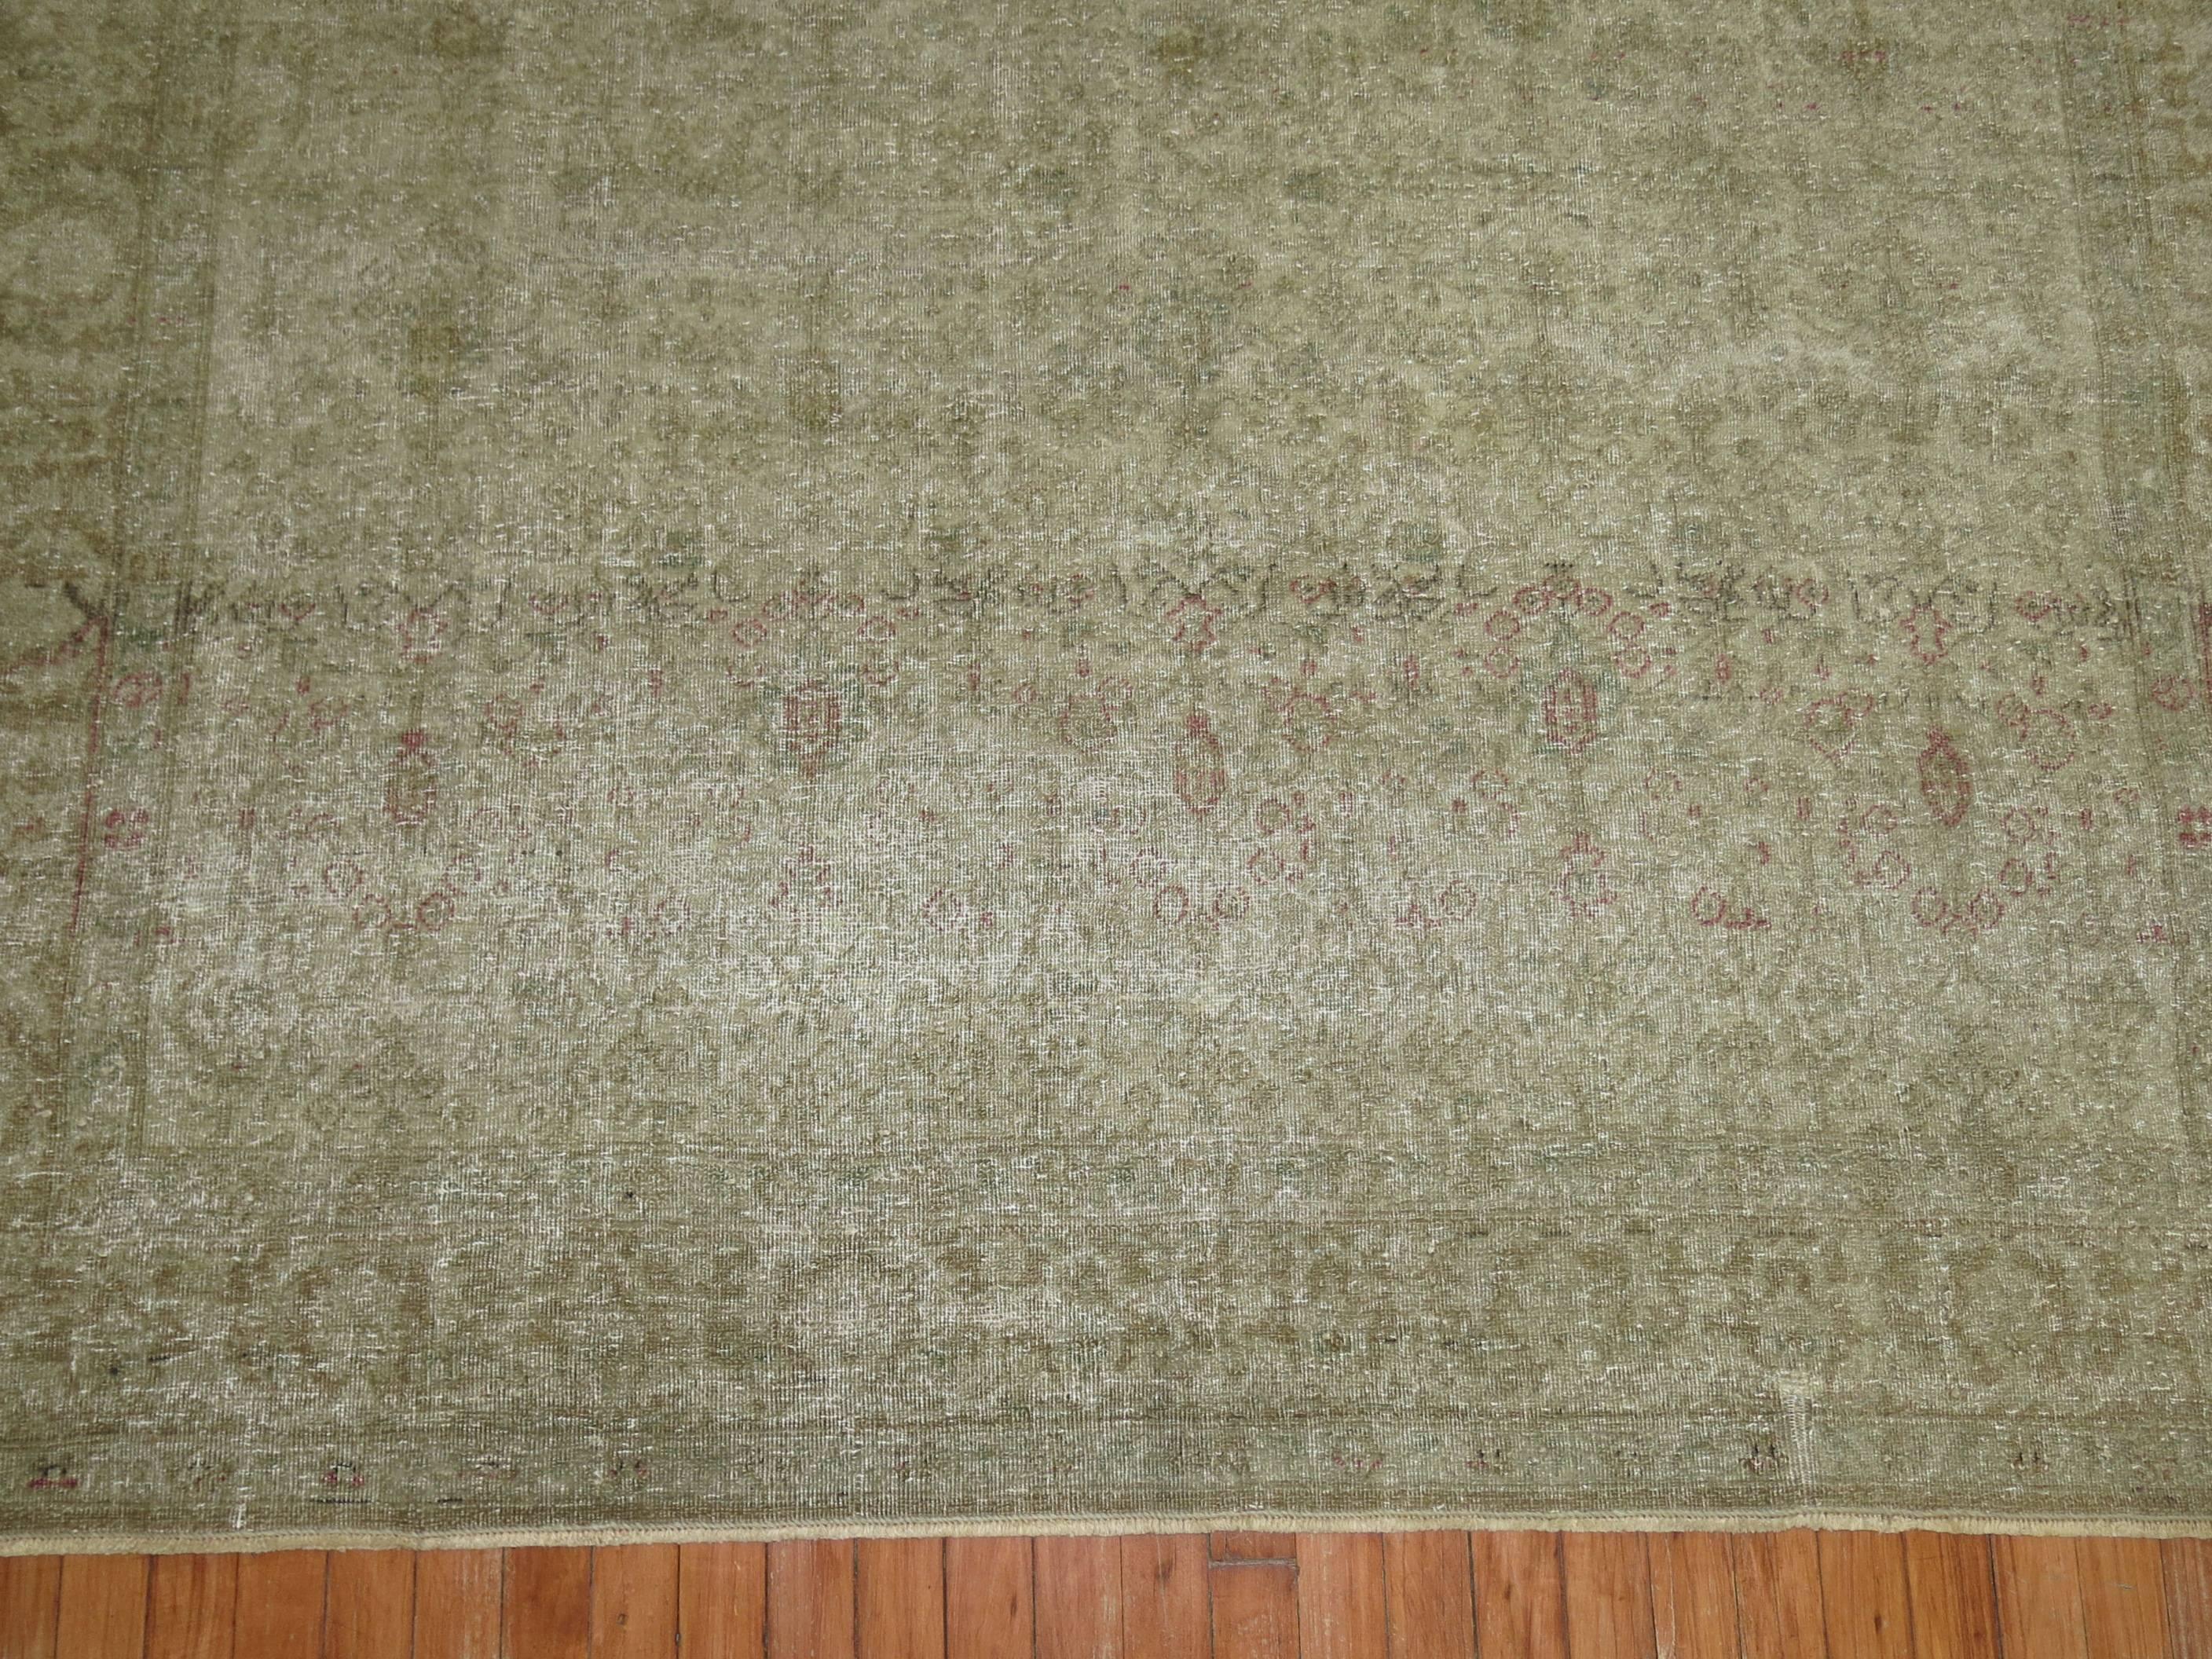 One-of-a-kind worn early 20th-century Turkish rug.

6'7'' x 9'8''